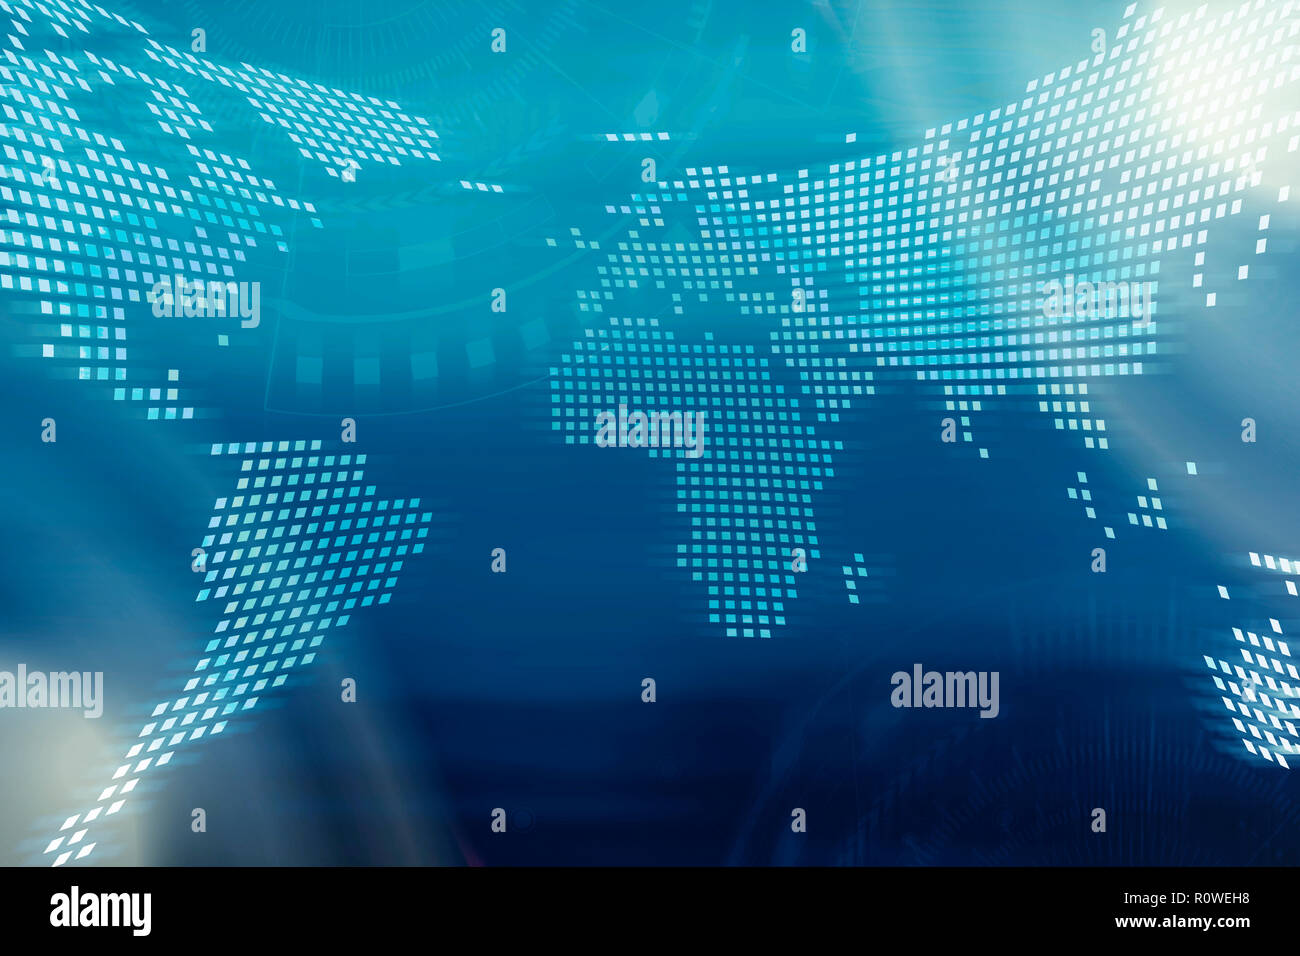 Technology background. Digital world map with technology icons on blurred blue background. Stock Photo